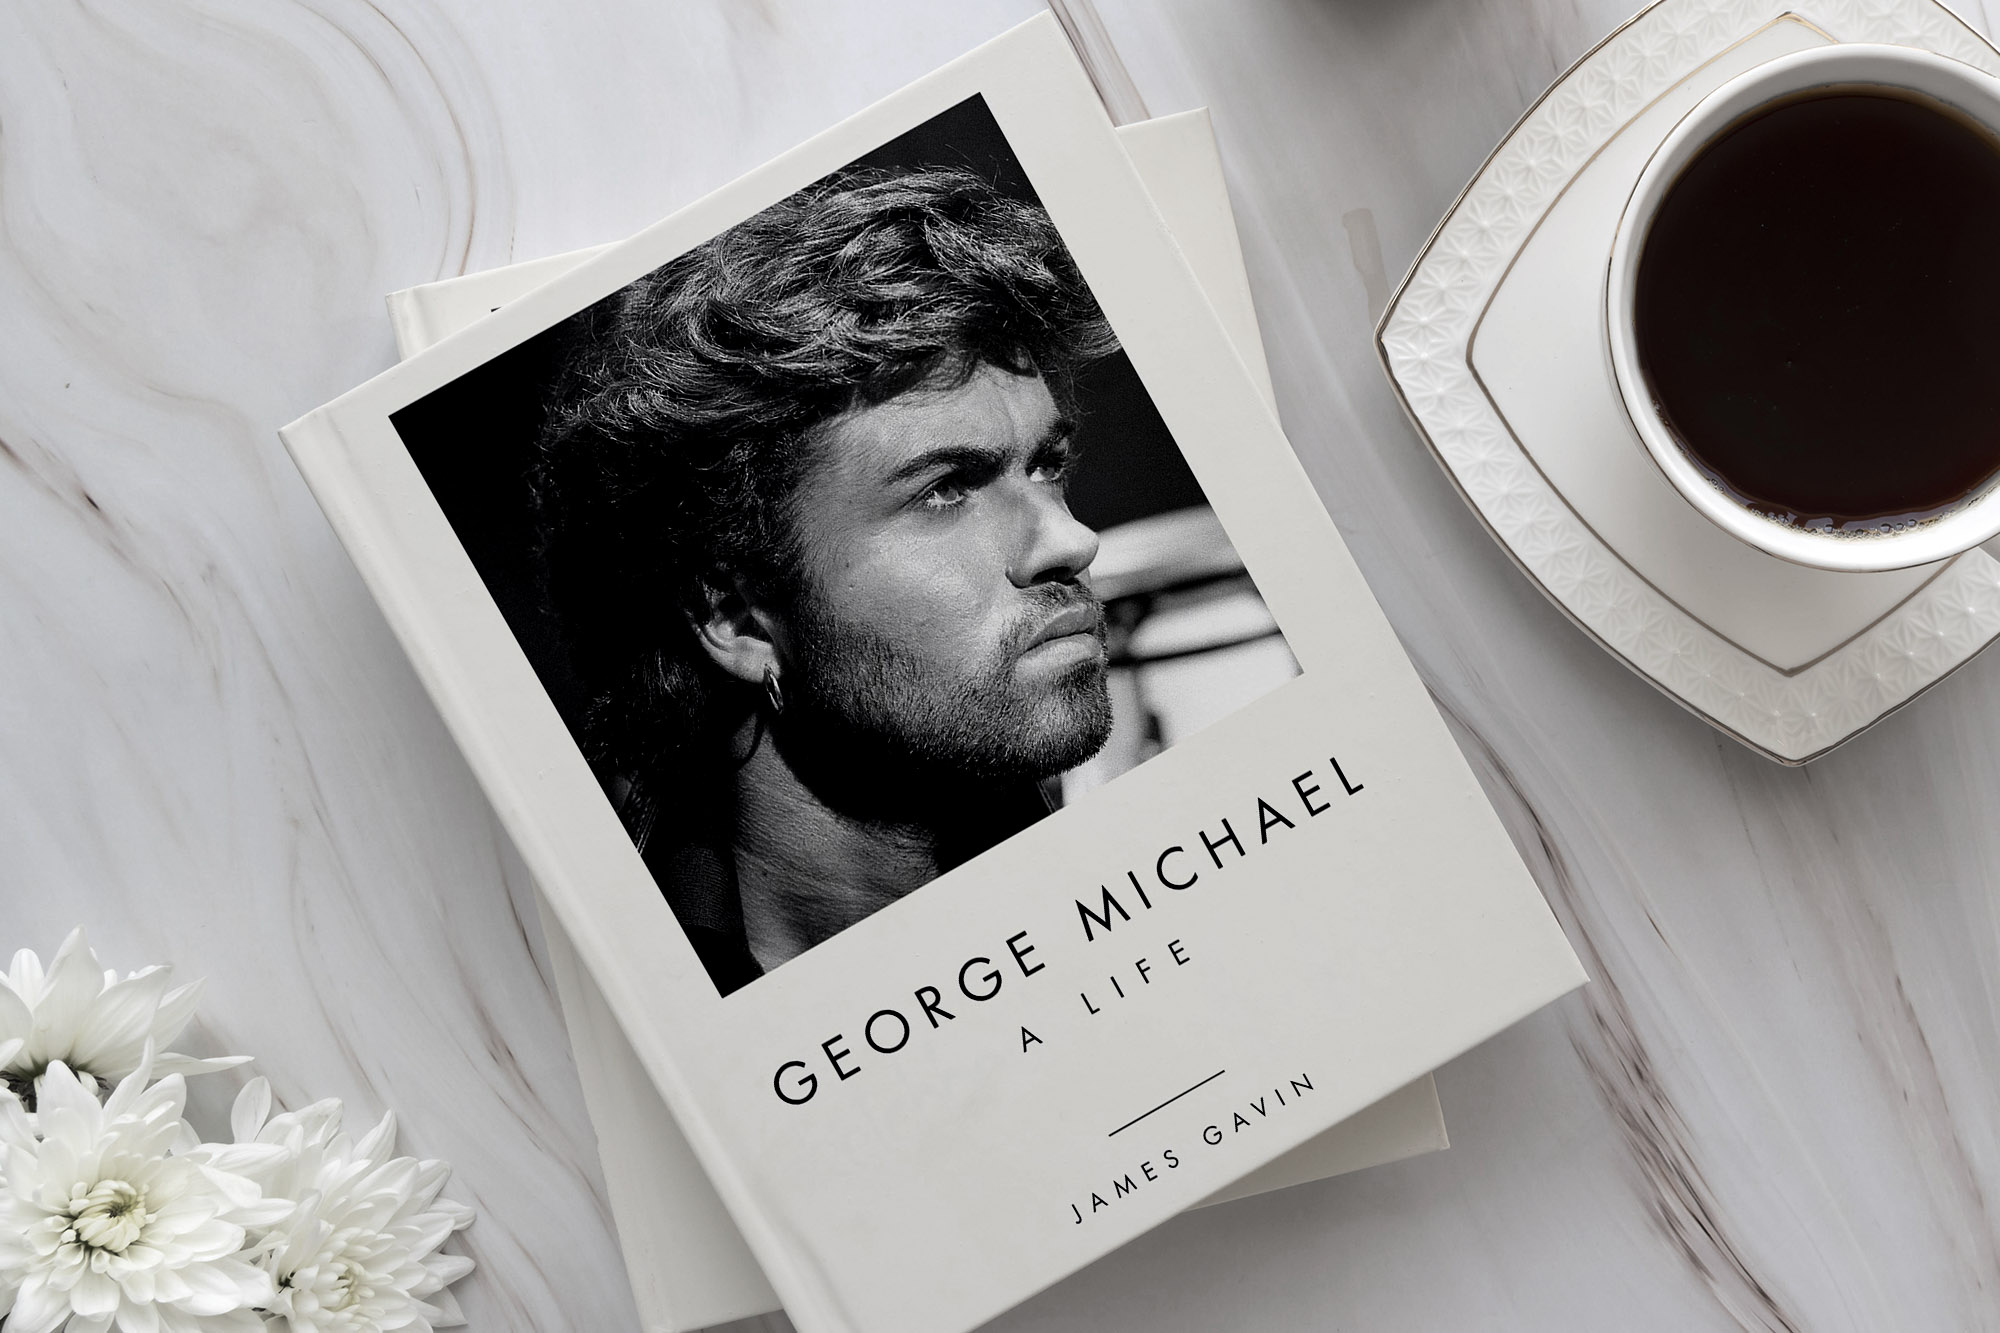 The cover to George Michael: A Life.